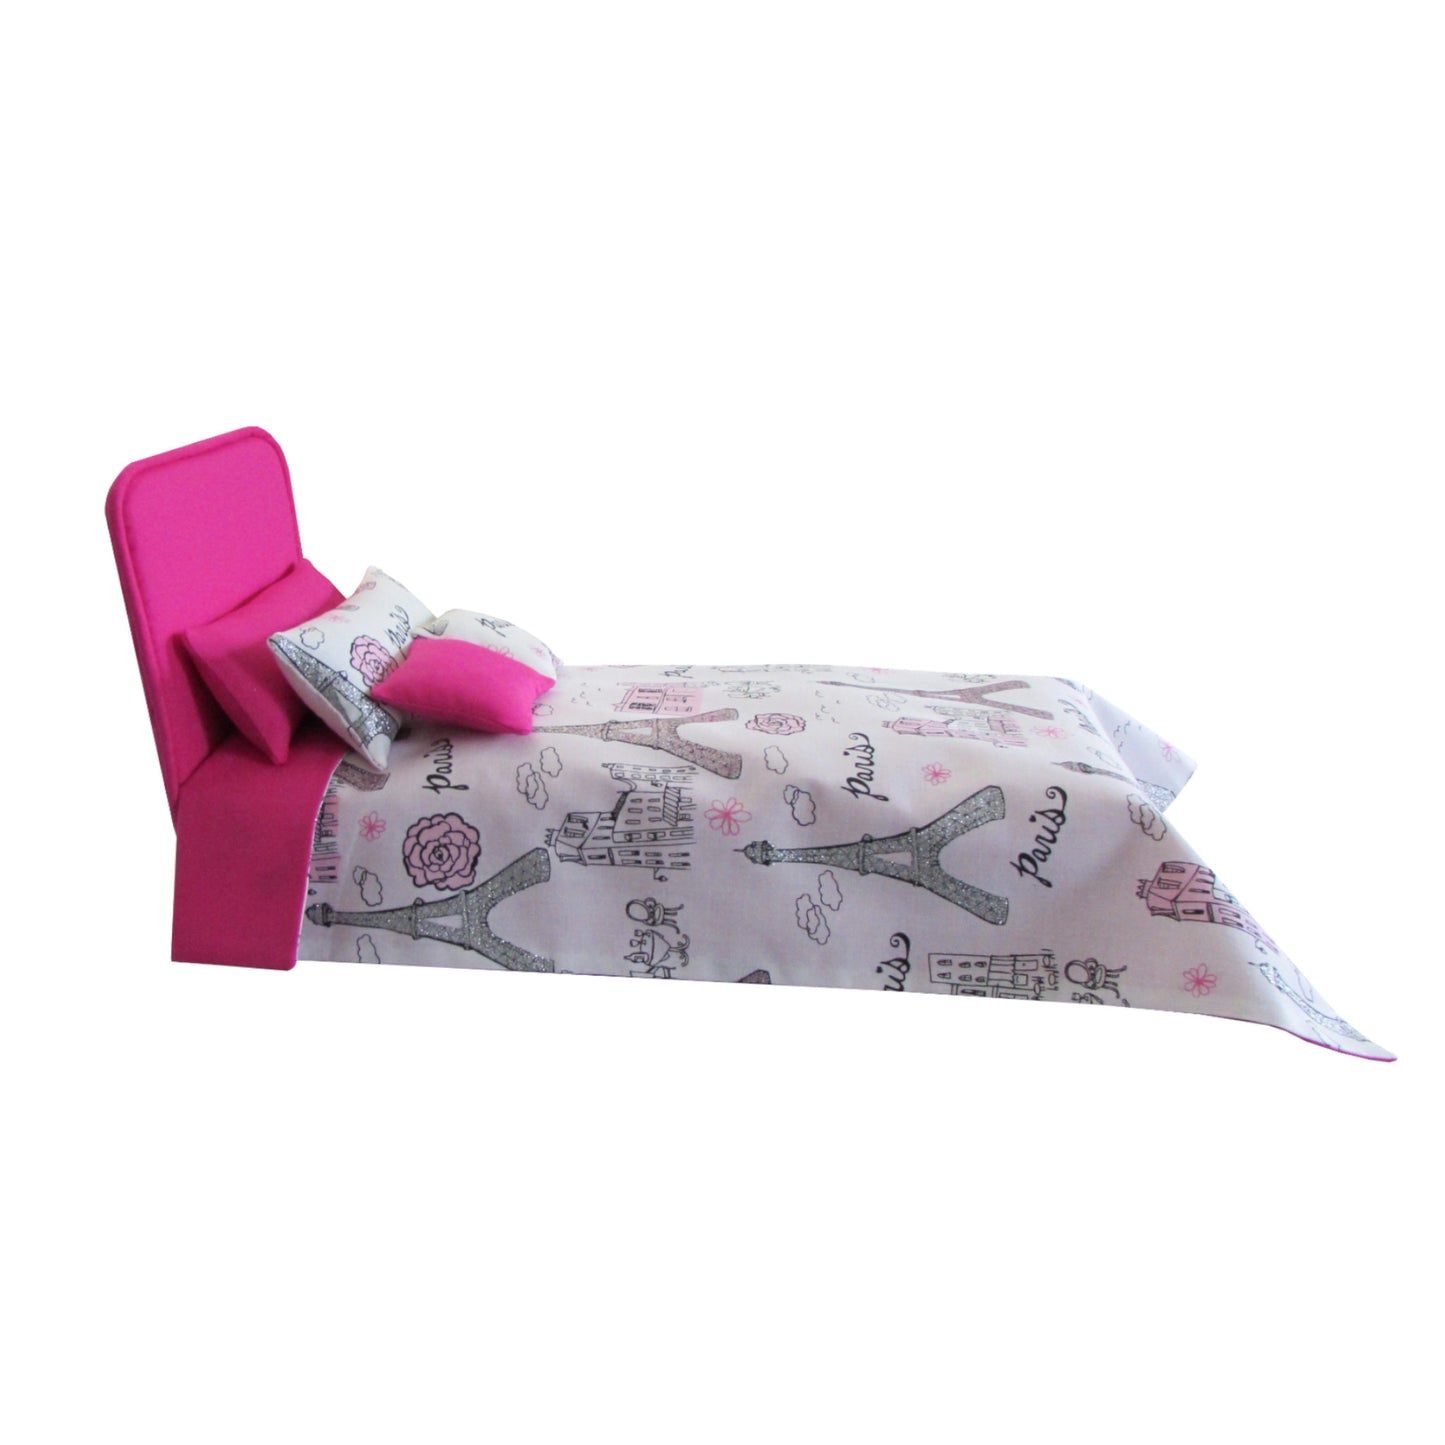 Bright Pink Doll Bed and Paris Doll Bedding for 11.5-inch and 12-inch dolls